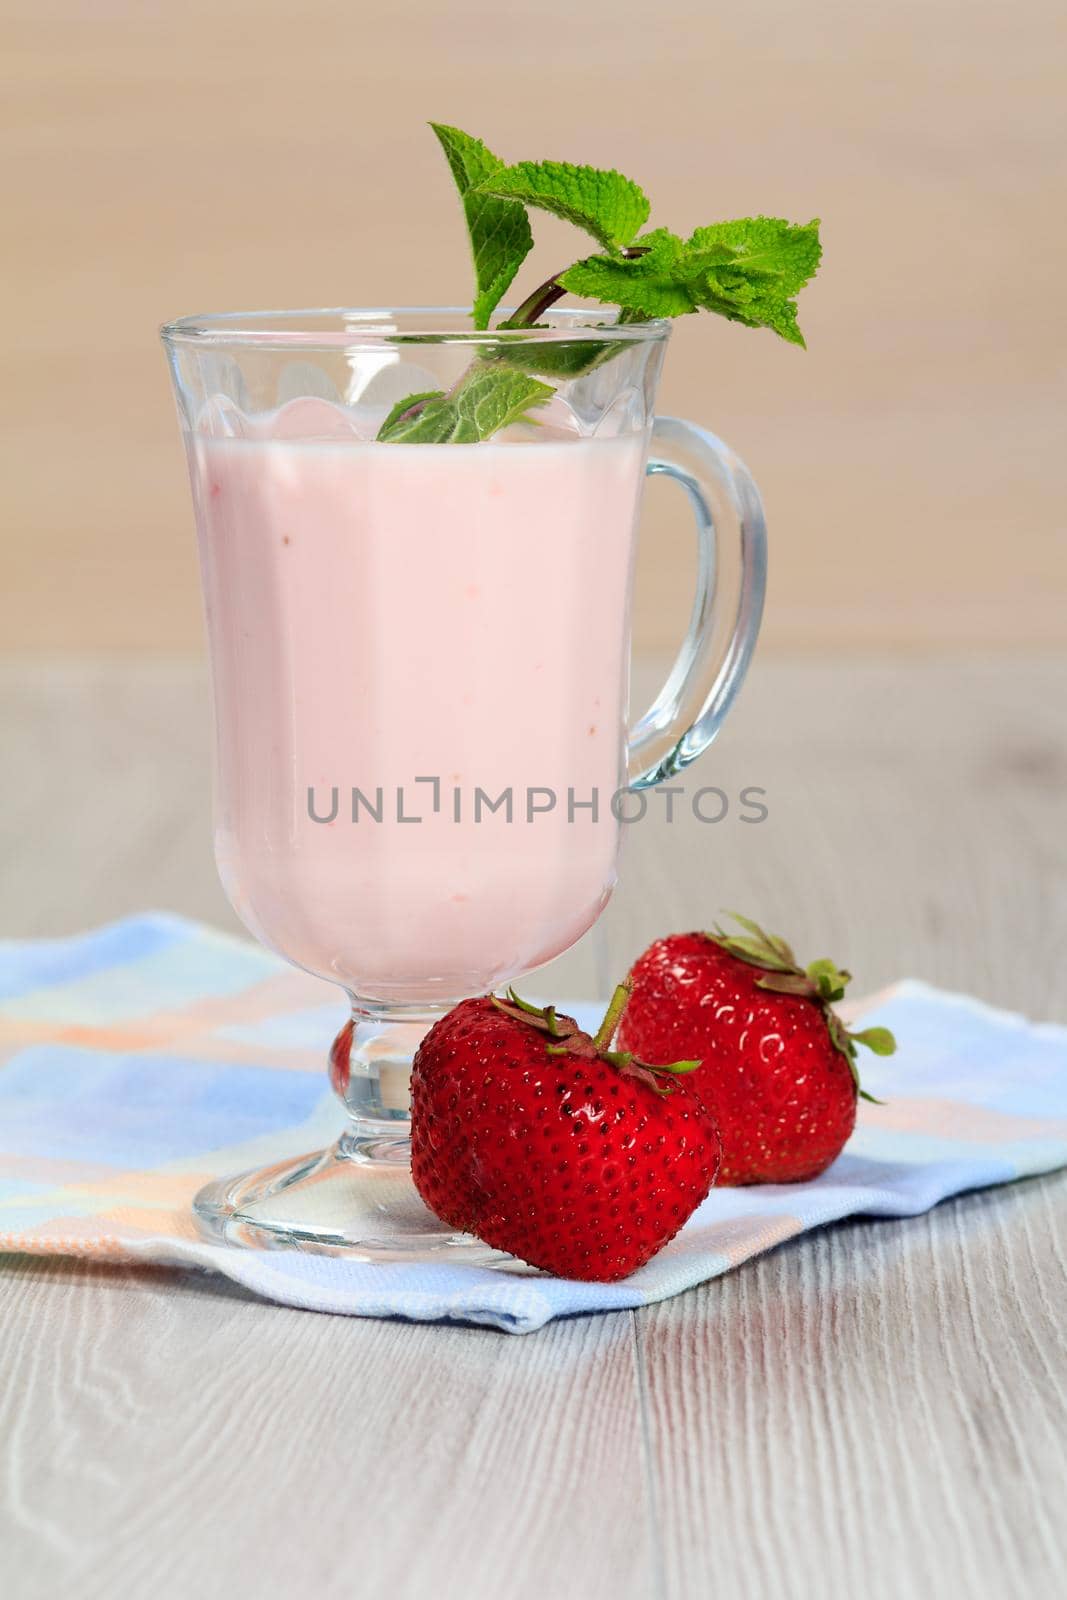 Glass of delicious yogurt with mint and fresh strawberries on white wooden table